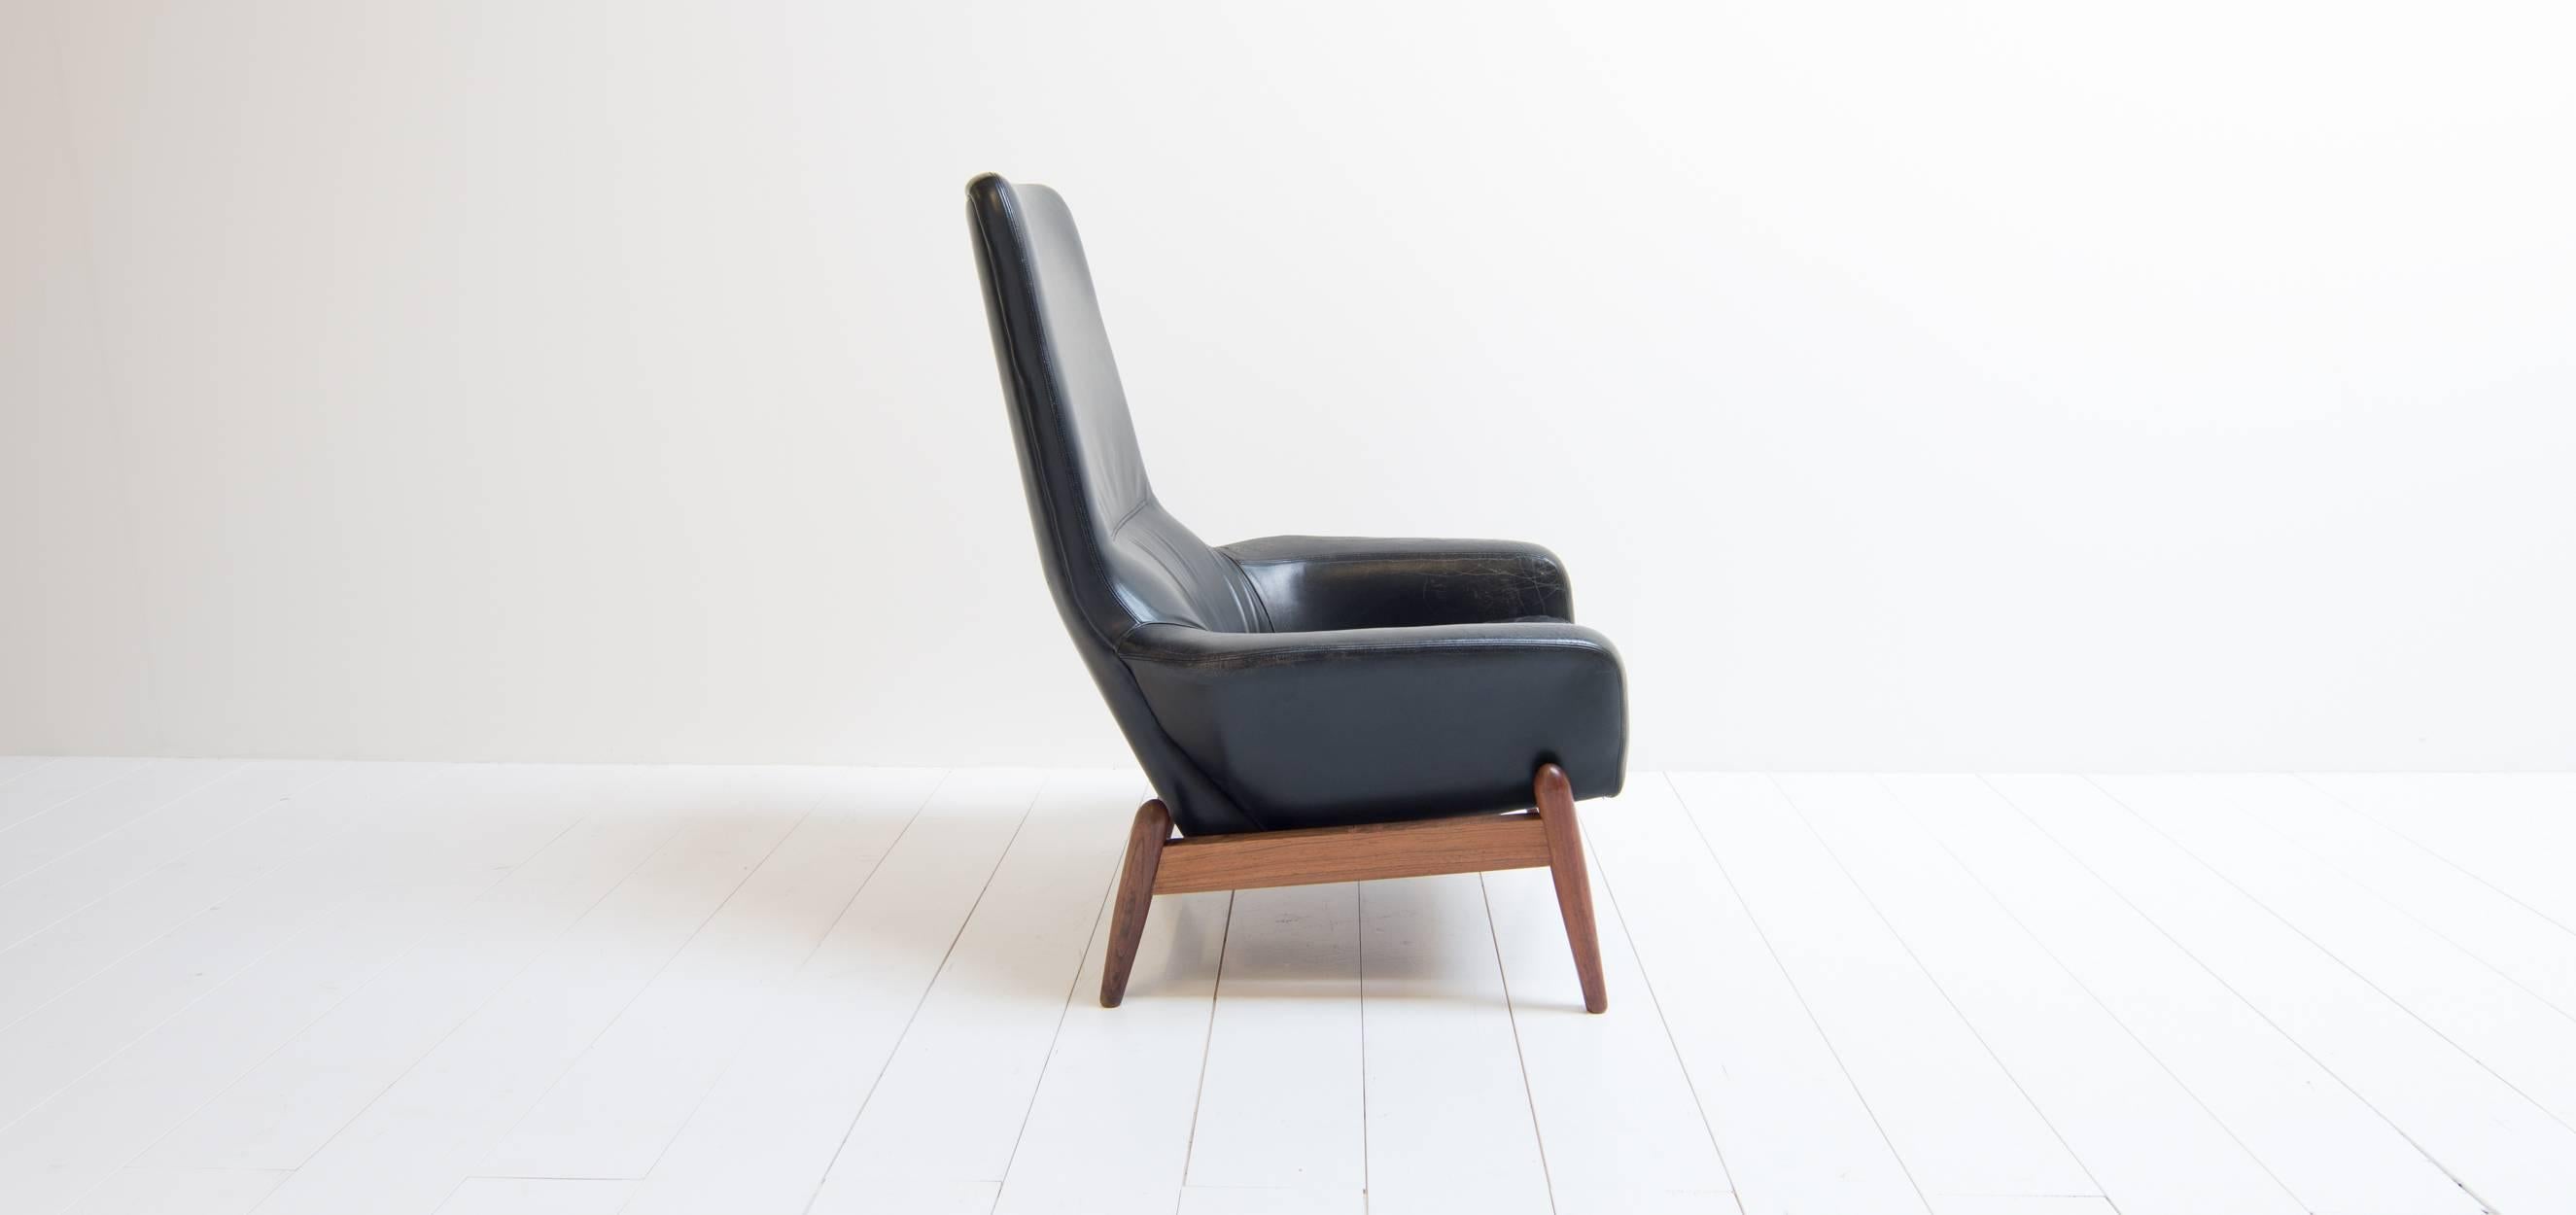 Bovenkamp lounge chair upholstered in black leather with rosewood frame. Ib Kofod Larsen designed this vintage lounge chair in the 1960s for the Dutch brand Bovenkamp. This is the high ‘male’ lounge chair.

The Design of the Bovenkamp lounge